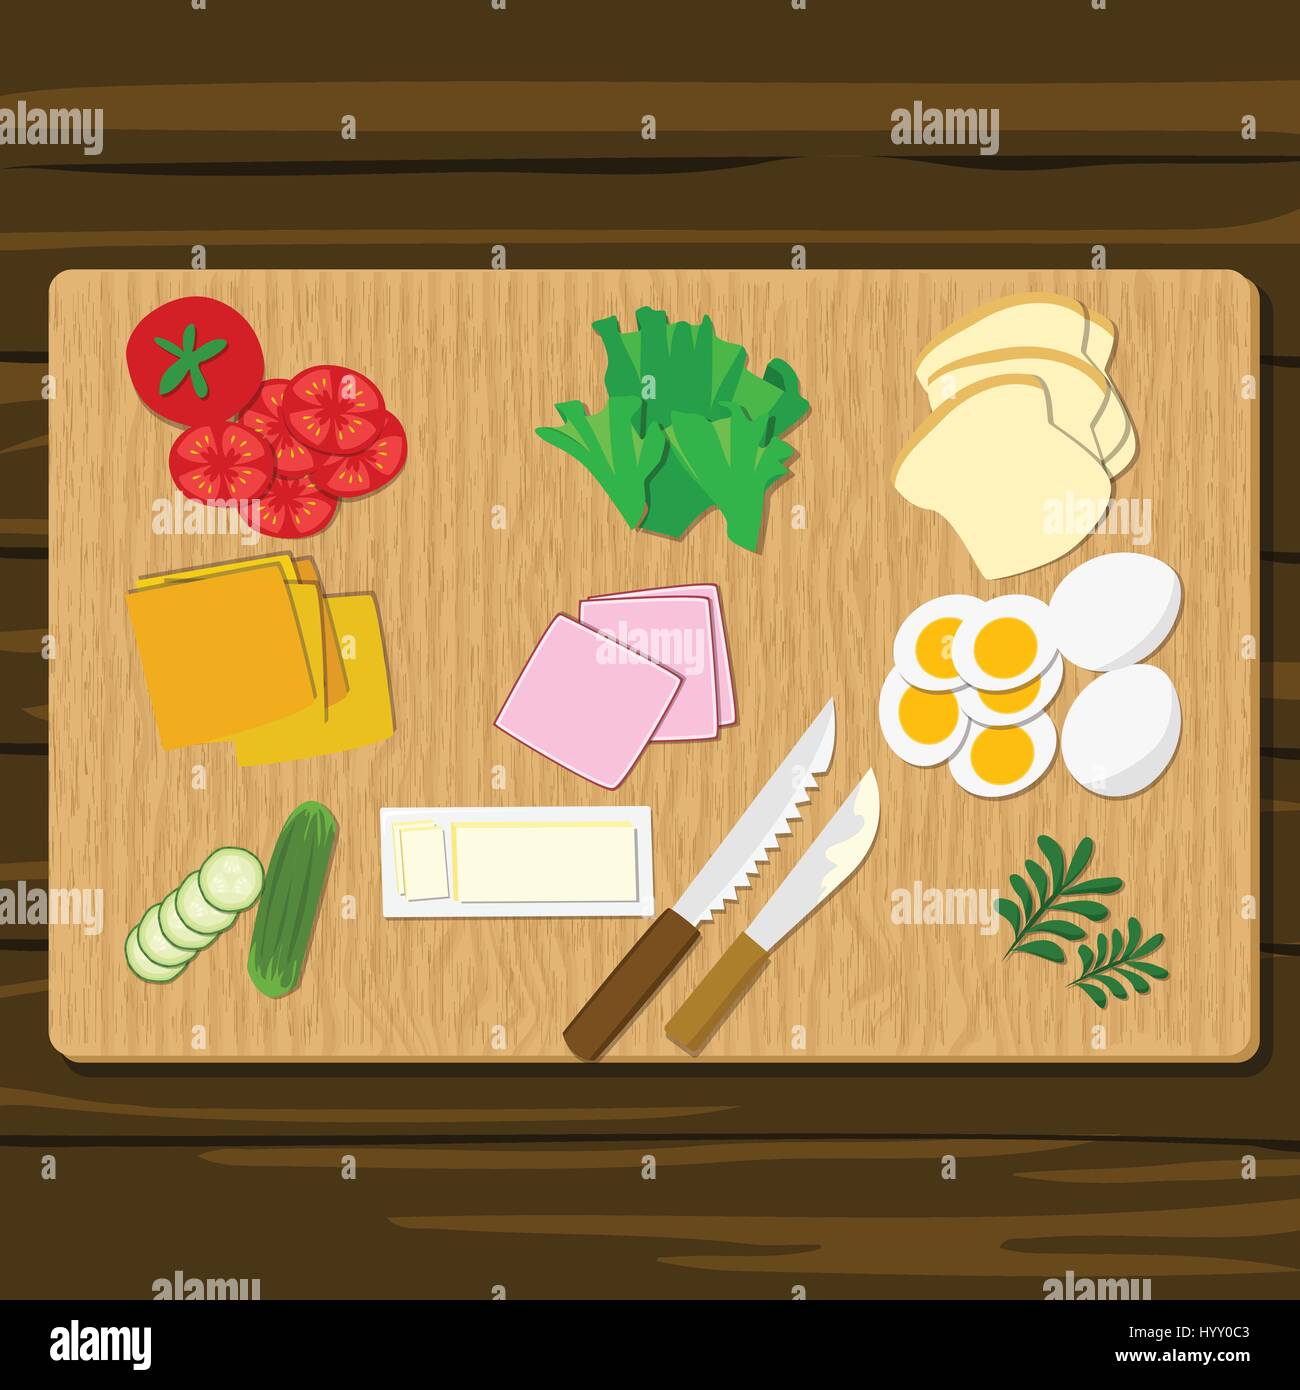 Vector Illustration of Ingredients for sandwiches. boiled egg, ham, cheese, cucumbers and other elements to build custom sandwiches. Stock Vector